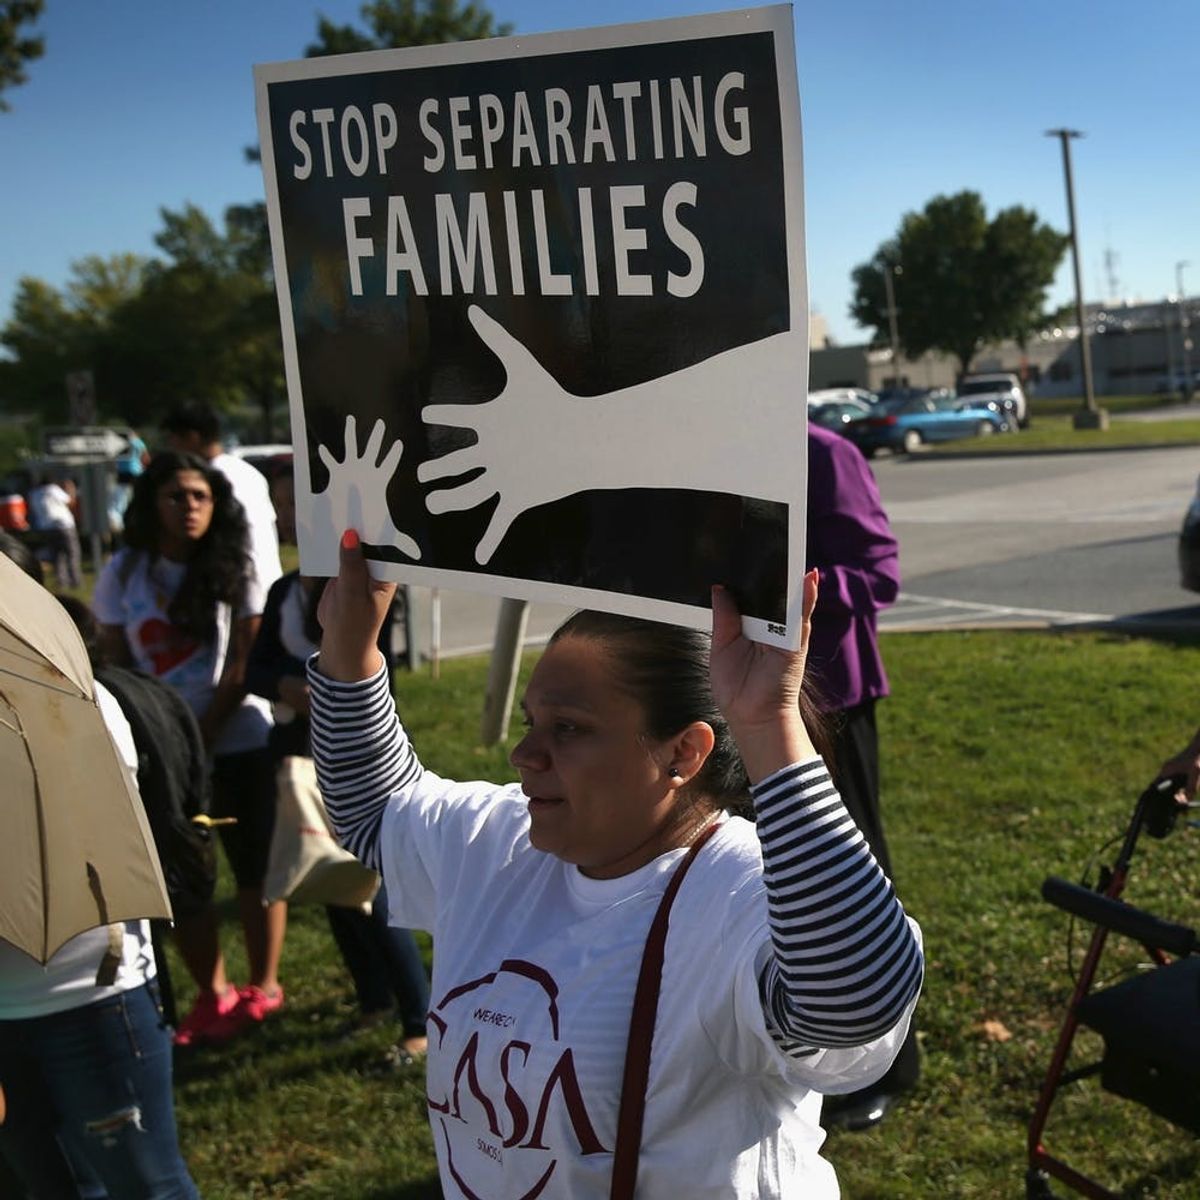 How to Help Immigrant Children Being Separated from Their Parents